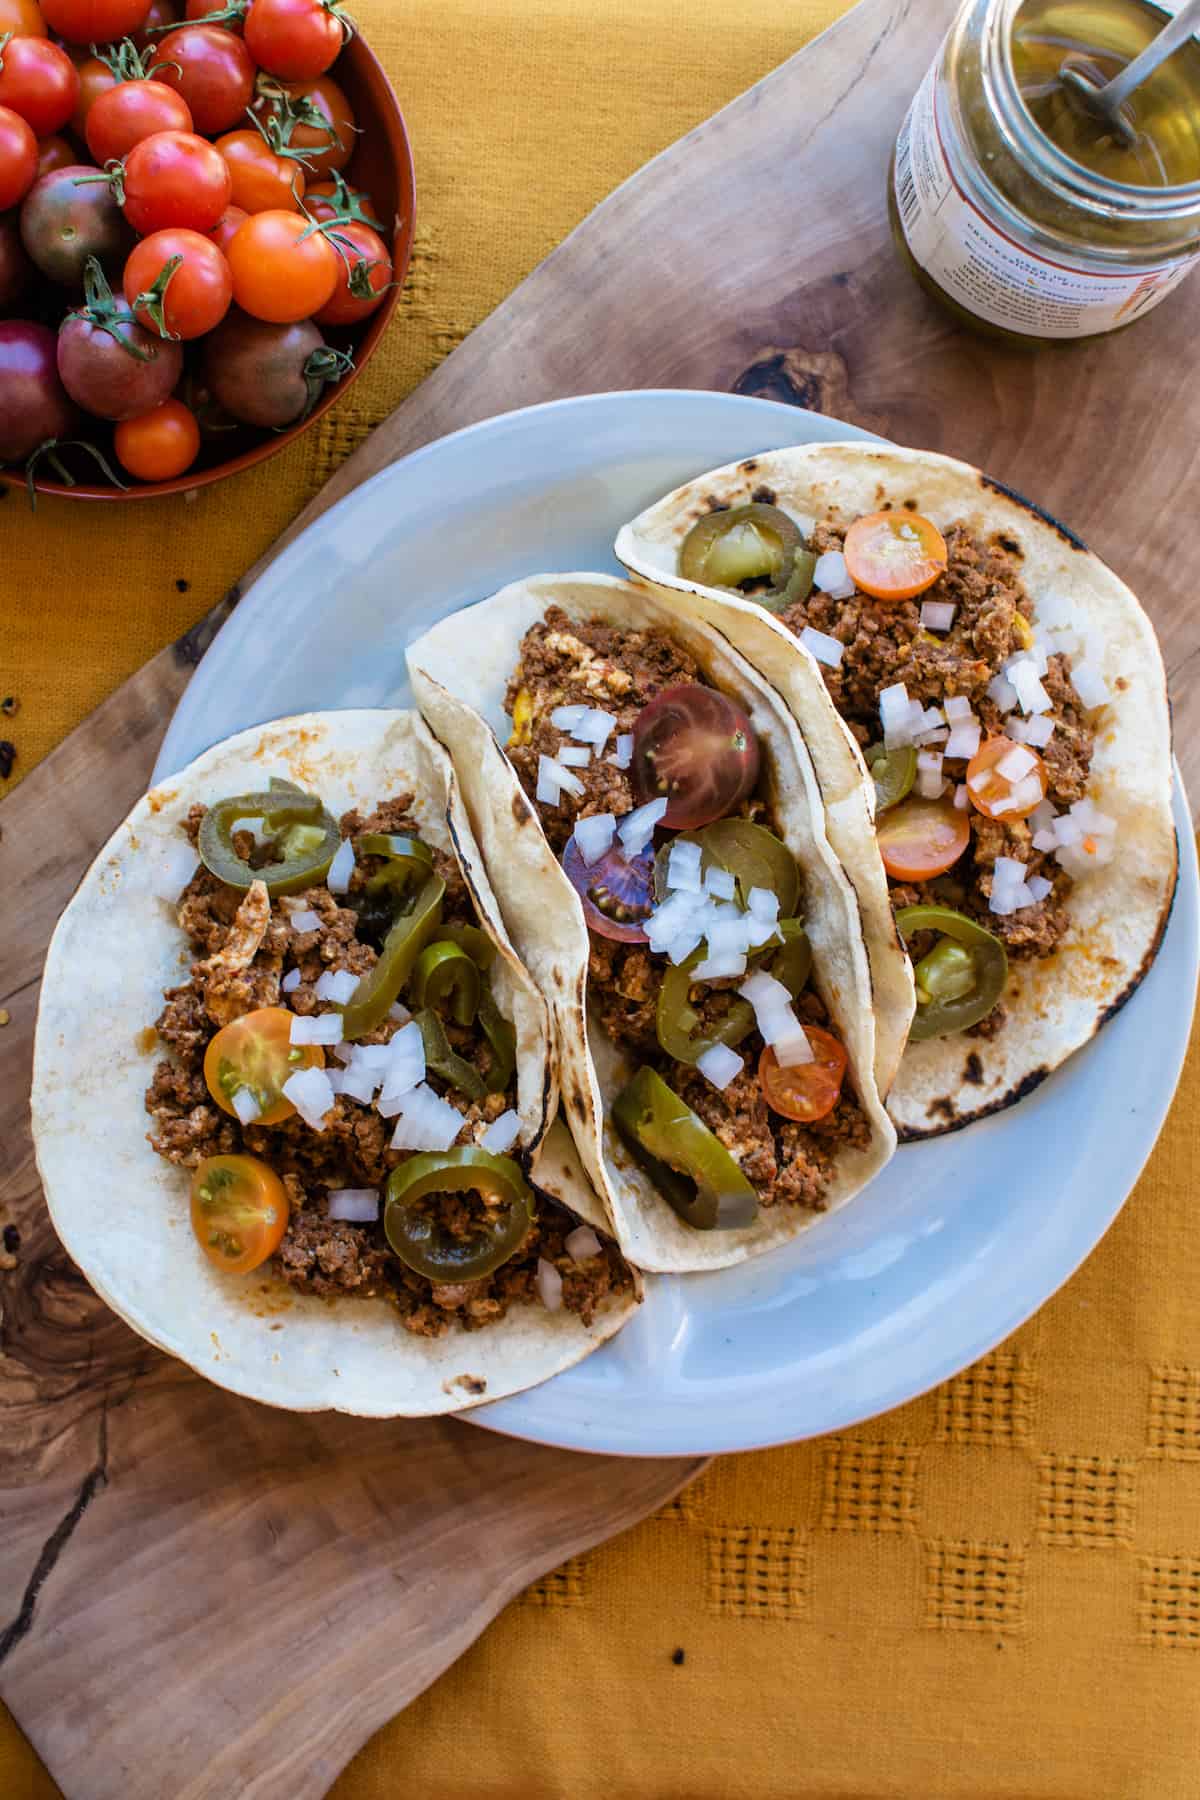 Making homemade Mexican Chorizo, is so much easier than you'd think—not to mention, incredibly delicious and healthier too. Made with simple ingredients like ground pork, chile peppers, vinegar, and spices, this fresh sausage is low-carb, keto, and gluten-free! #chorizo #mexicanchorizo #groundpork #ad